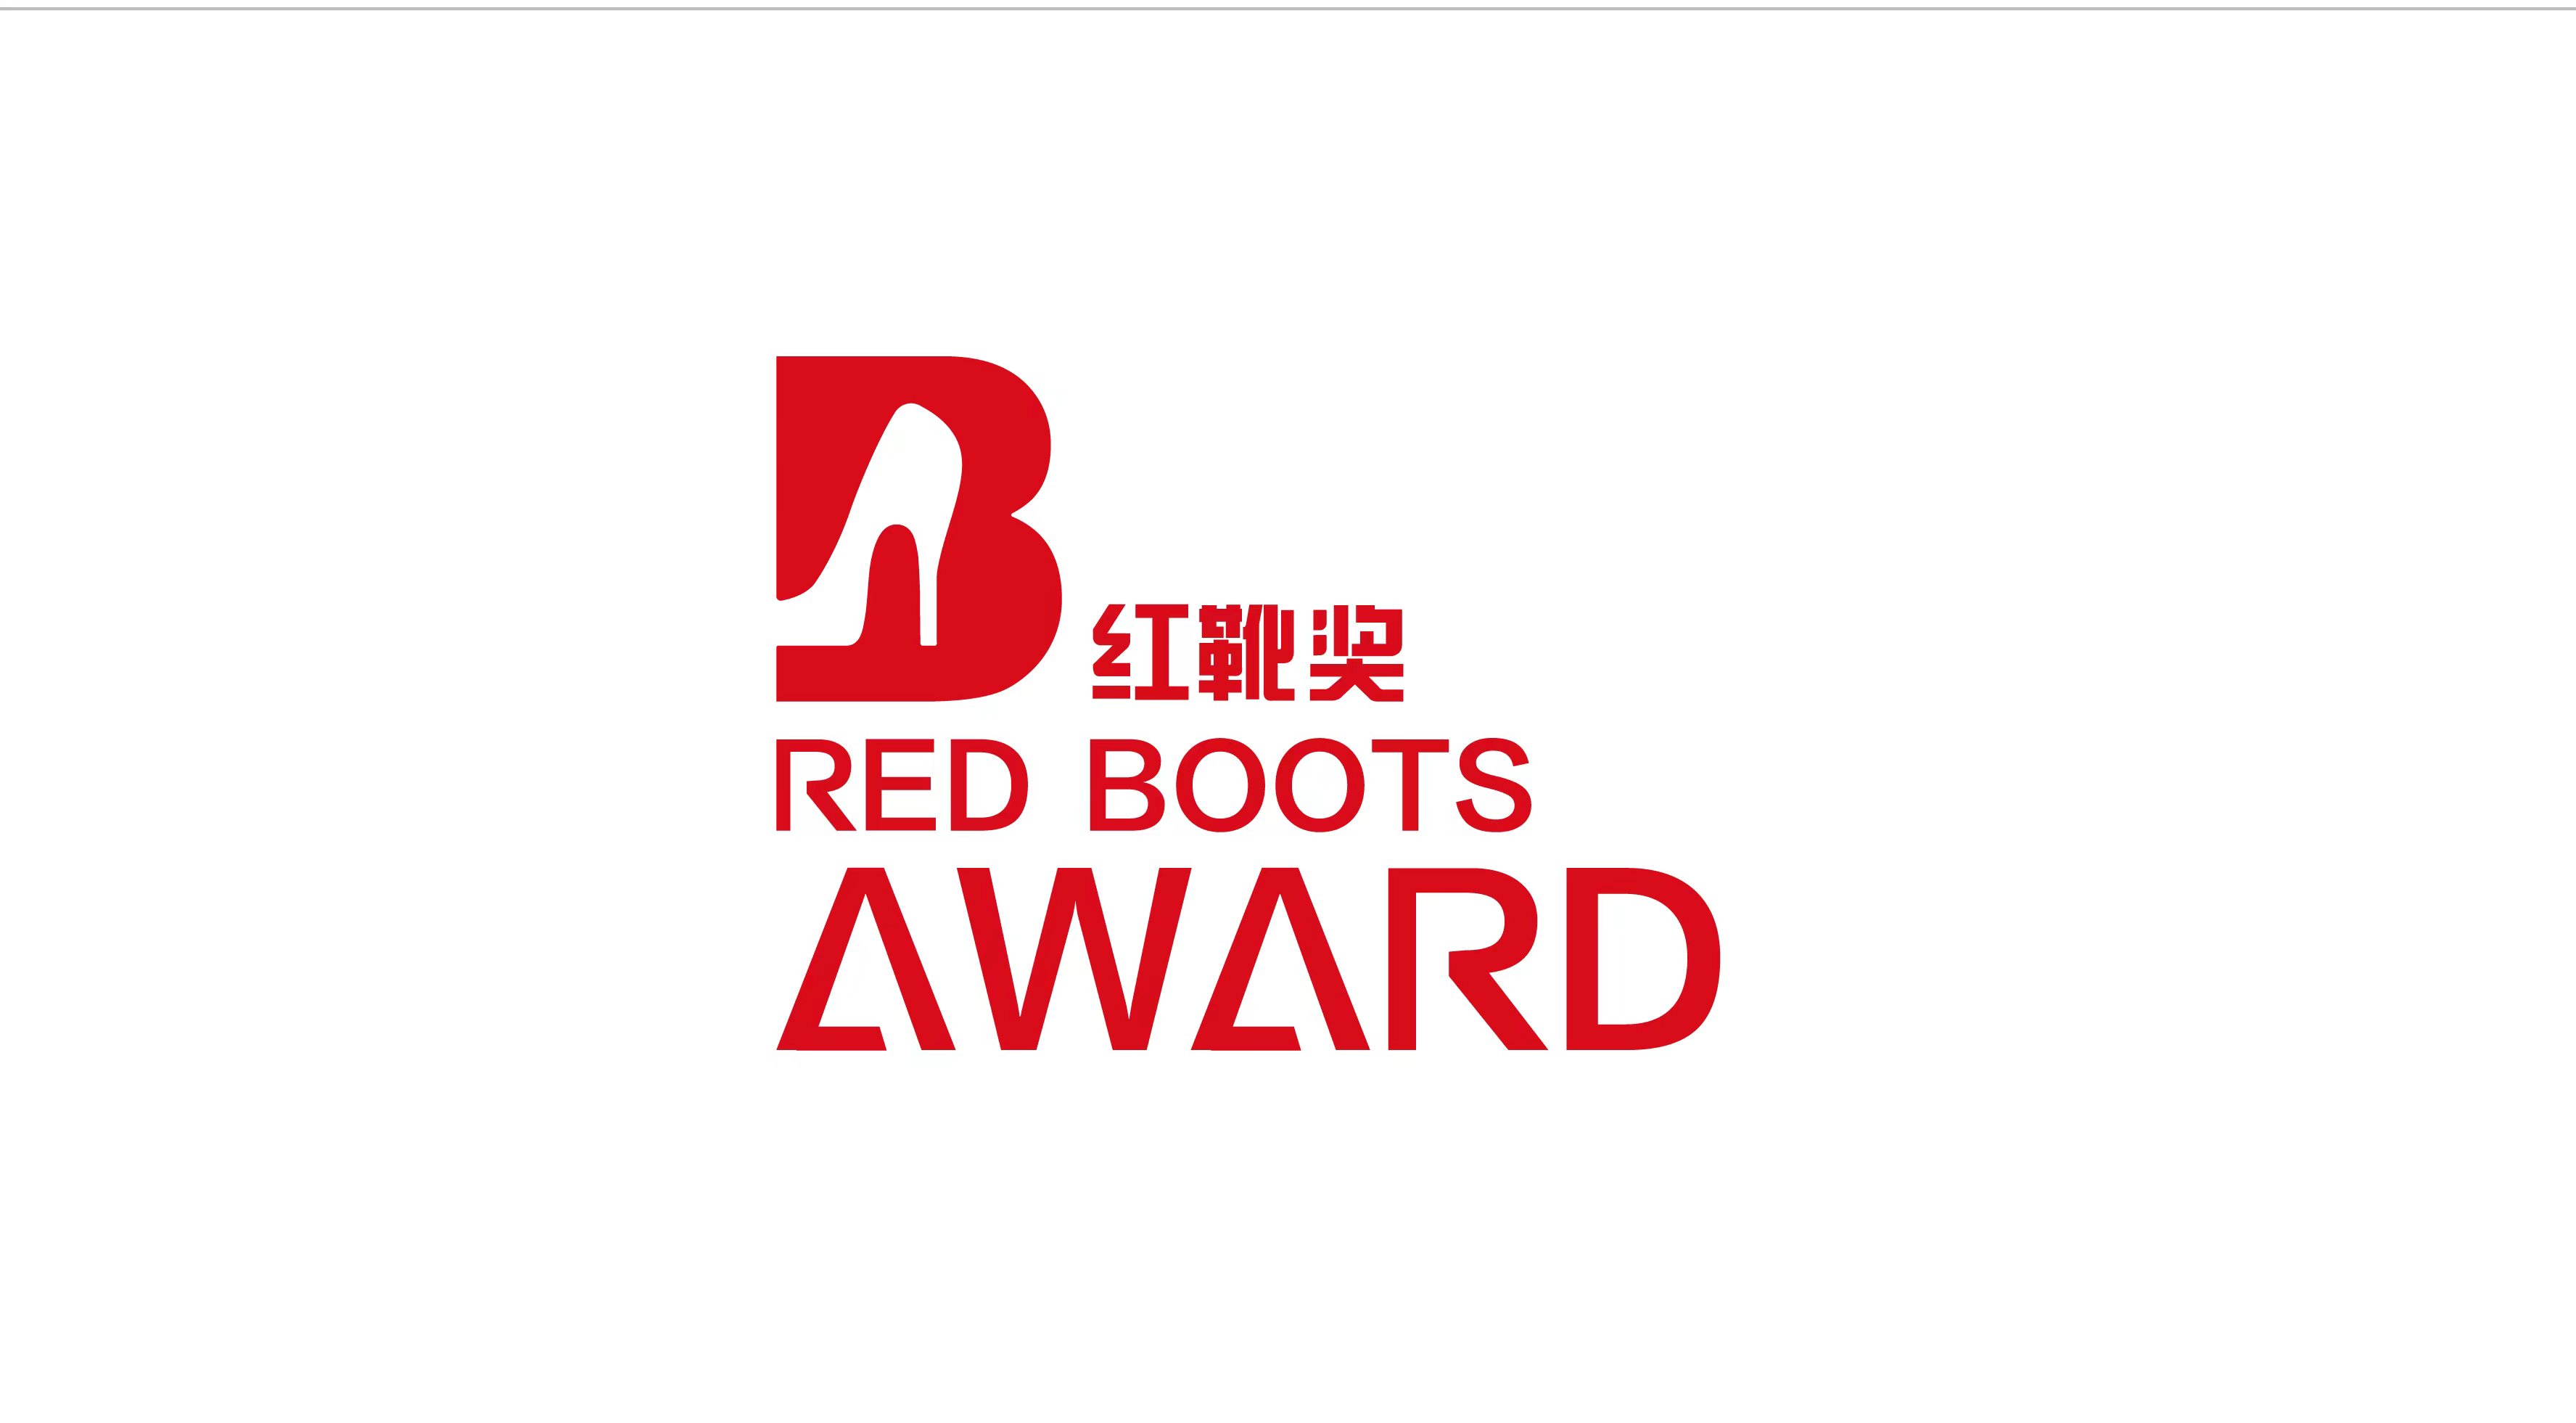 Red Boots Award